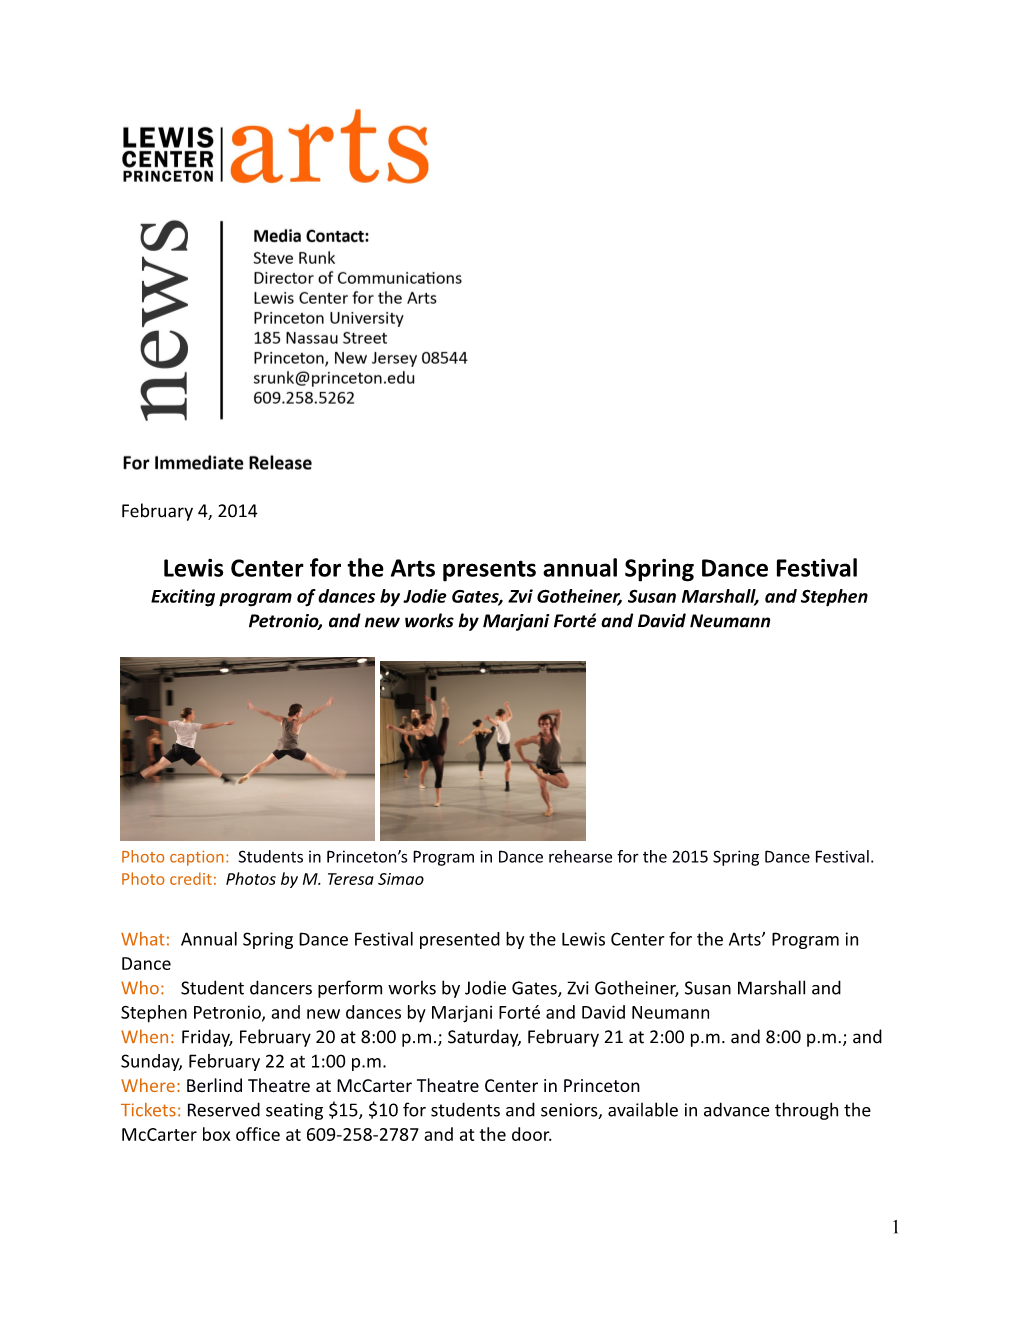 Lewis Center for the Arts Presents Annual Spring Dance Festival